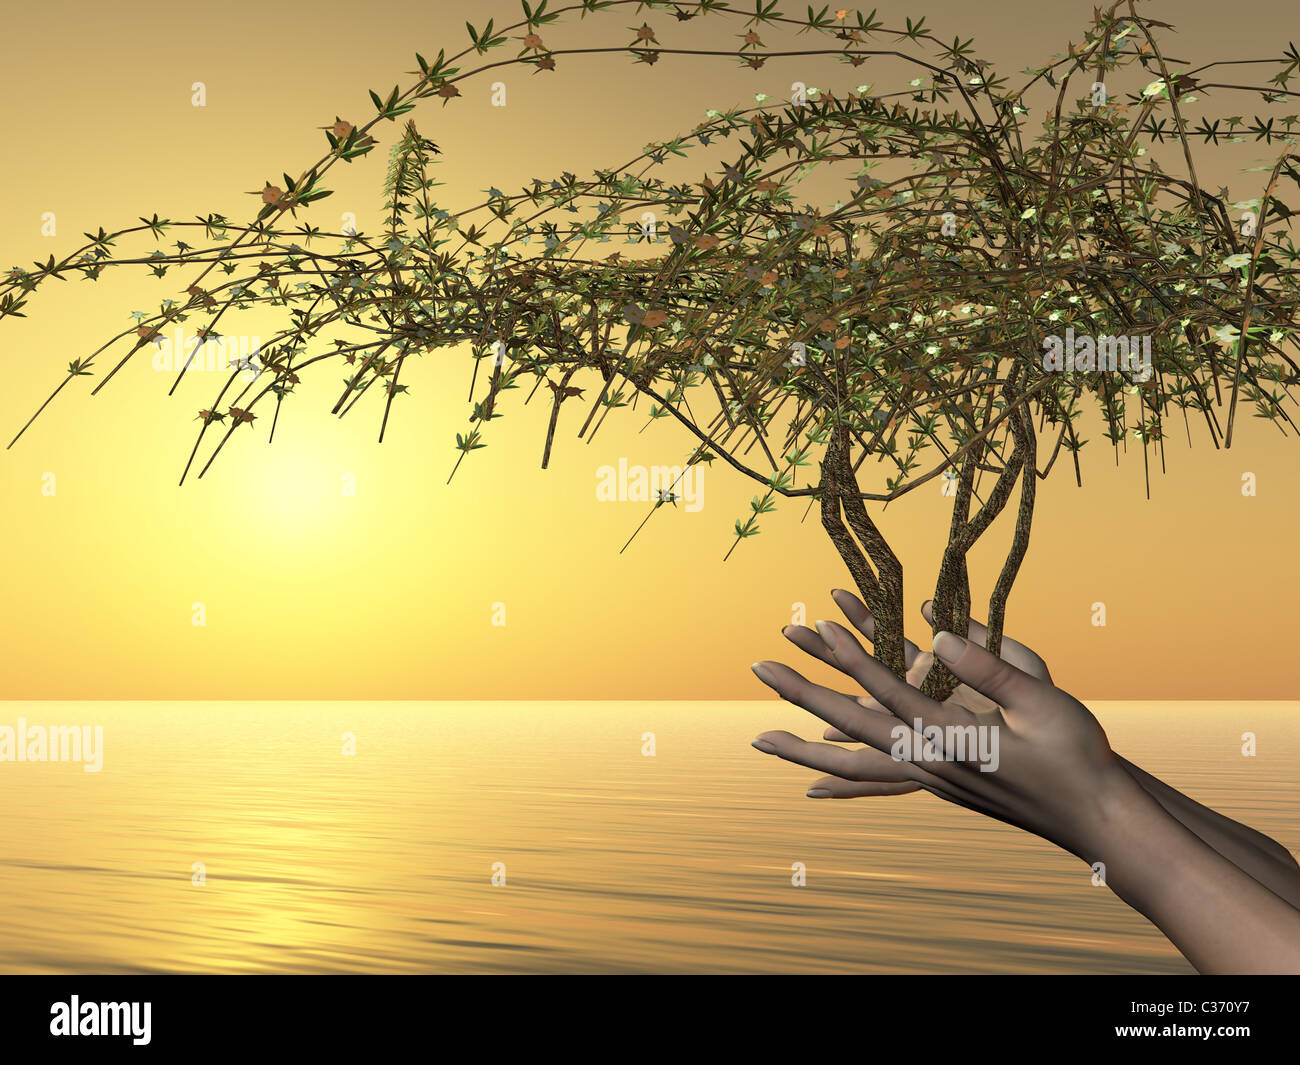 EMBRACE OF LIFE - Human hands hold the gift of life in tree form. Stock Photo